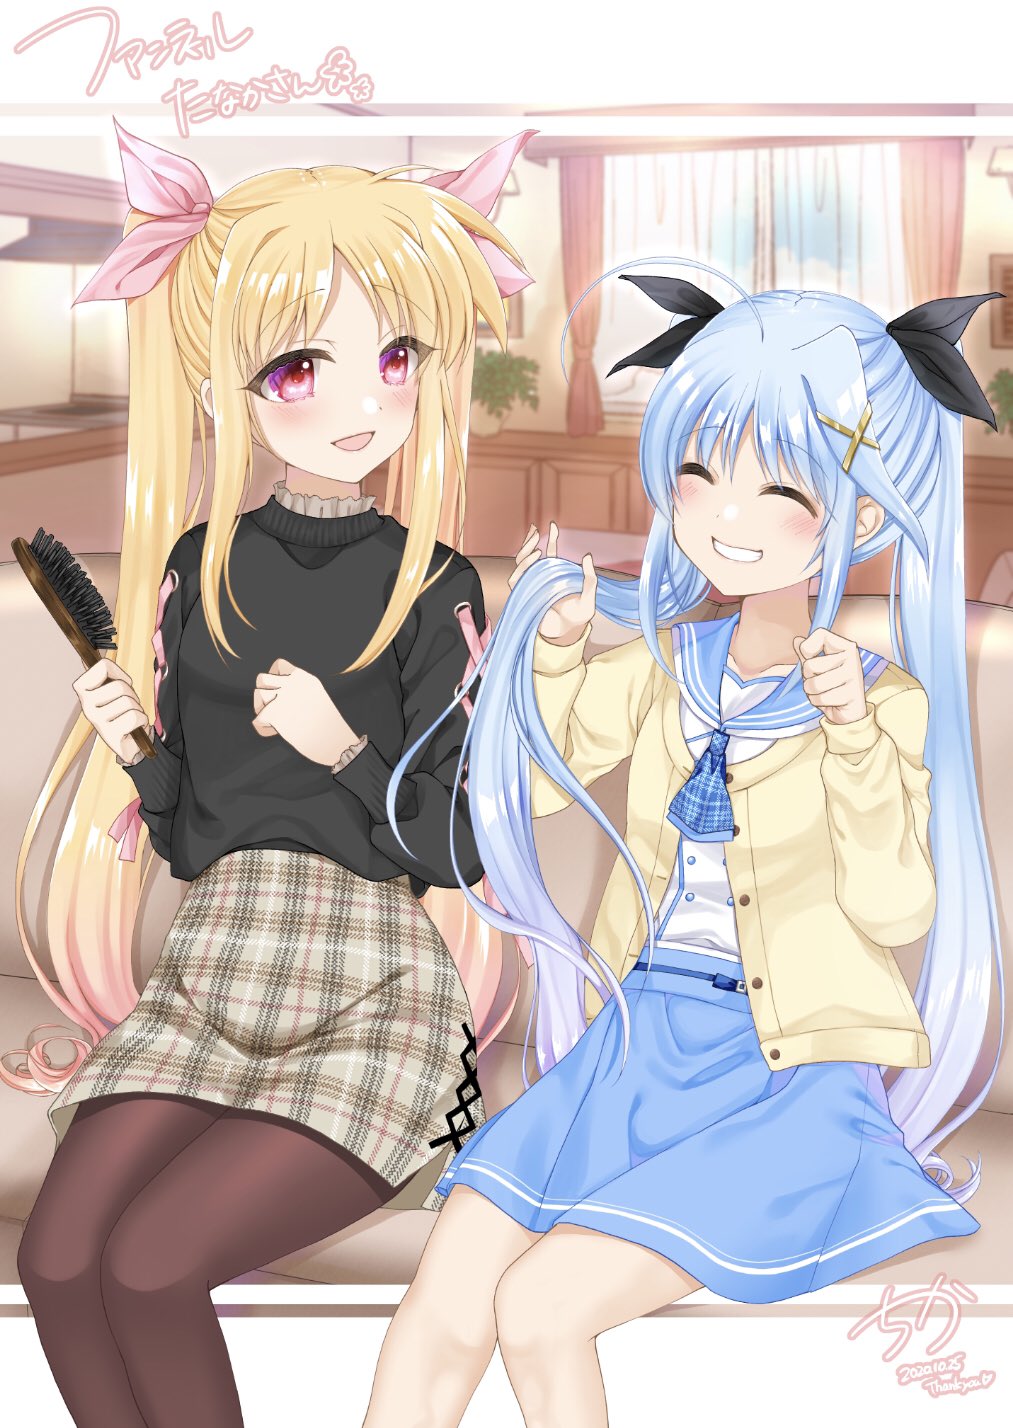 2girls ahoge ameyado_chika artist_name bangs black_legwear black_ribbon black_sweater blonde_hair blue_hair blue_sailor_collar blue_skirt cardigan casual closed_eyes commentary_request dated english_text eyebrows_visible_through_hair fate_testarossa grey_skirt grin hair_ornament hair_ribbon highres holding holding_brush indoors long_hair long_sleeves looking_at_another lyrical_nanoha mahou_shoujo_lyrical_nanoha mahou_shoujo_lyrical_nanoha_a's mahou_shoujo_lyrical_nanoha_a's_portable:_the_battle_of_aces material-l miniskirt multiple_girls open_mouth pantyhose pencil_skirt pink_ribbon plaid plaid_skirt red_eyes ribbon sailor_collar shirt signature sitting skirt smile sweater twintails white_shirt x_hair_ornament yellow_cardigan